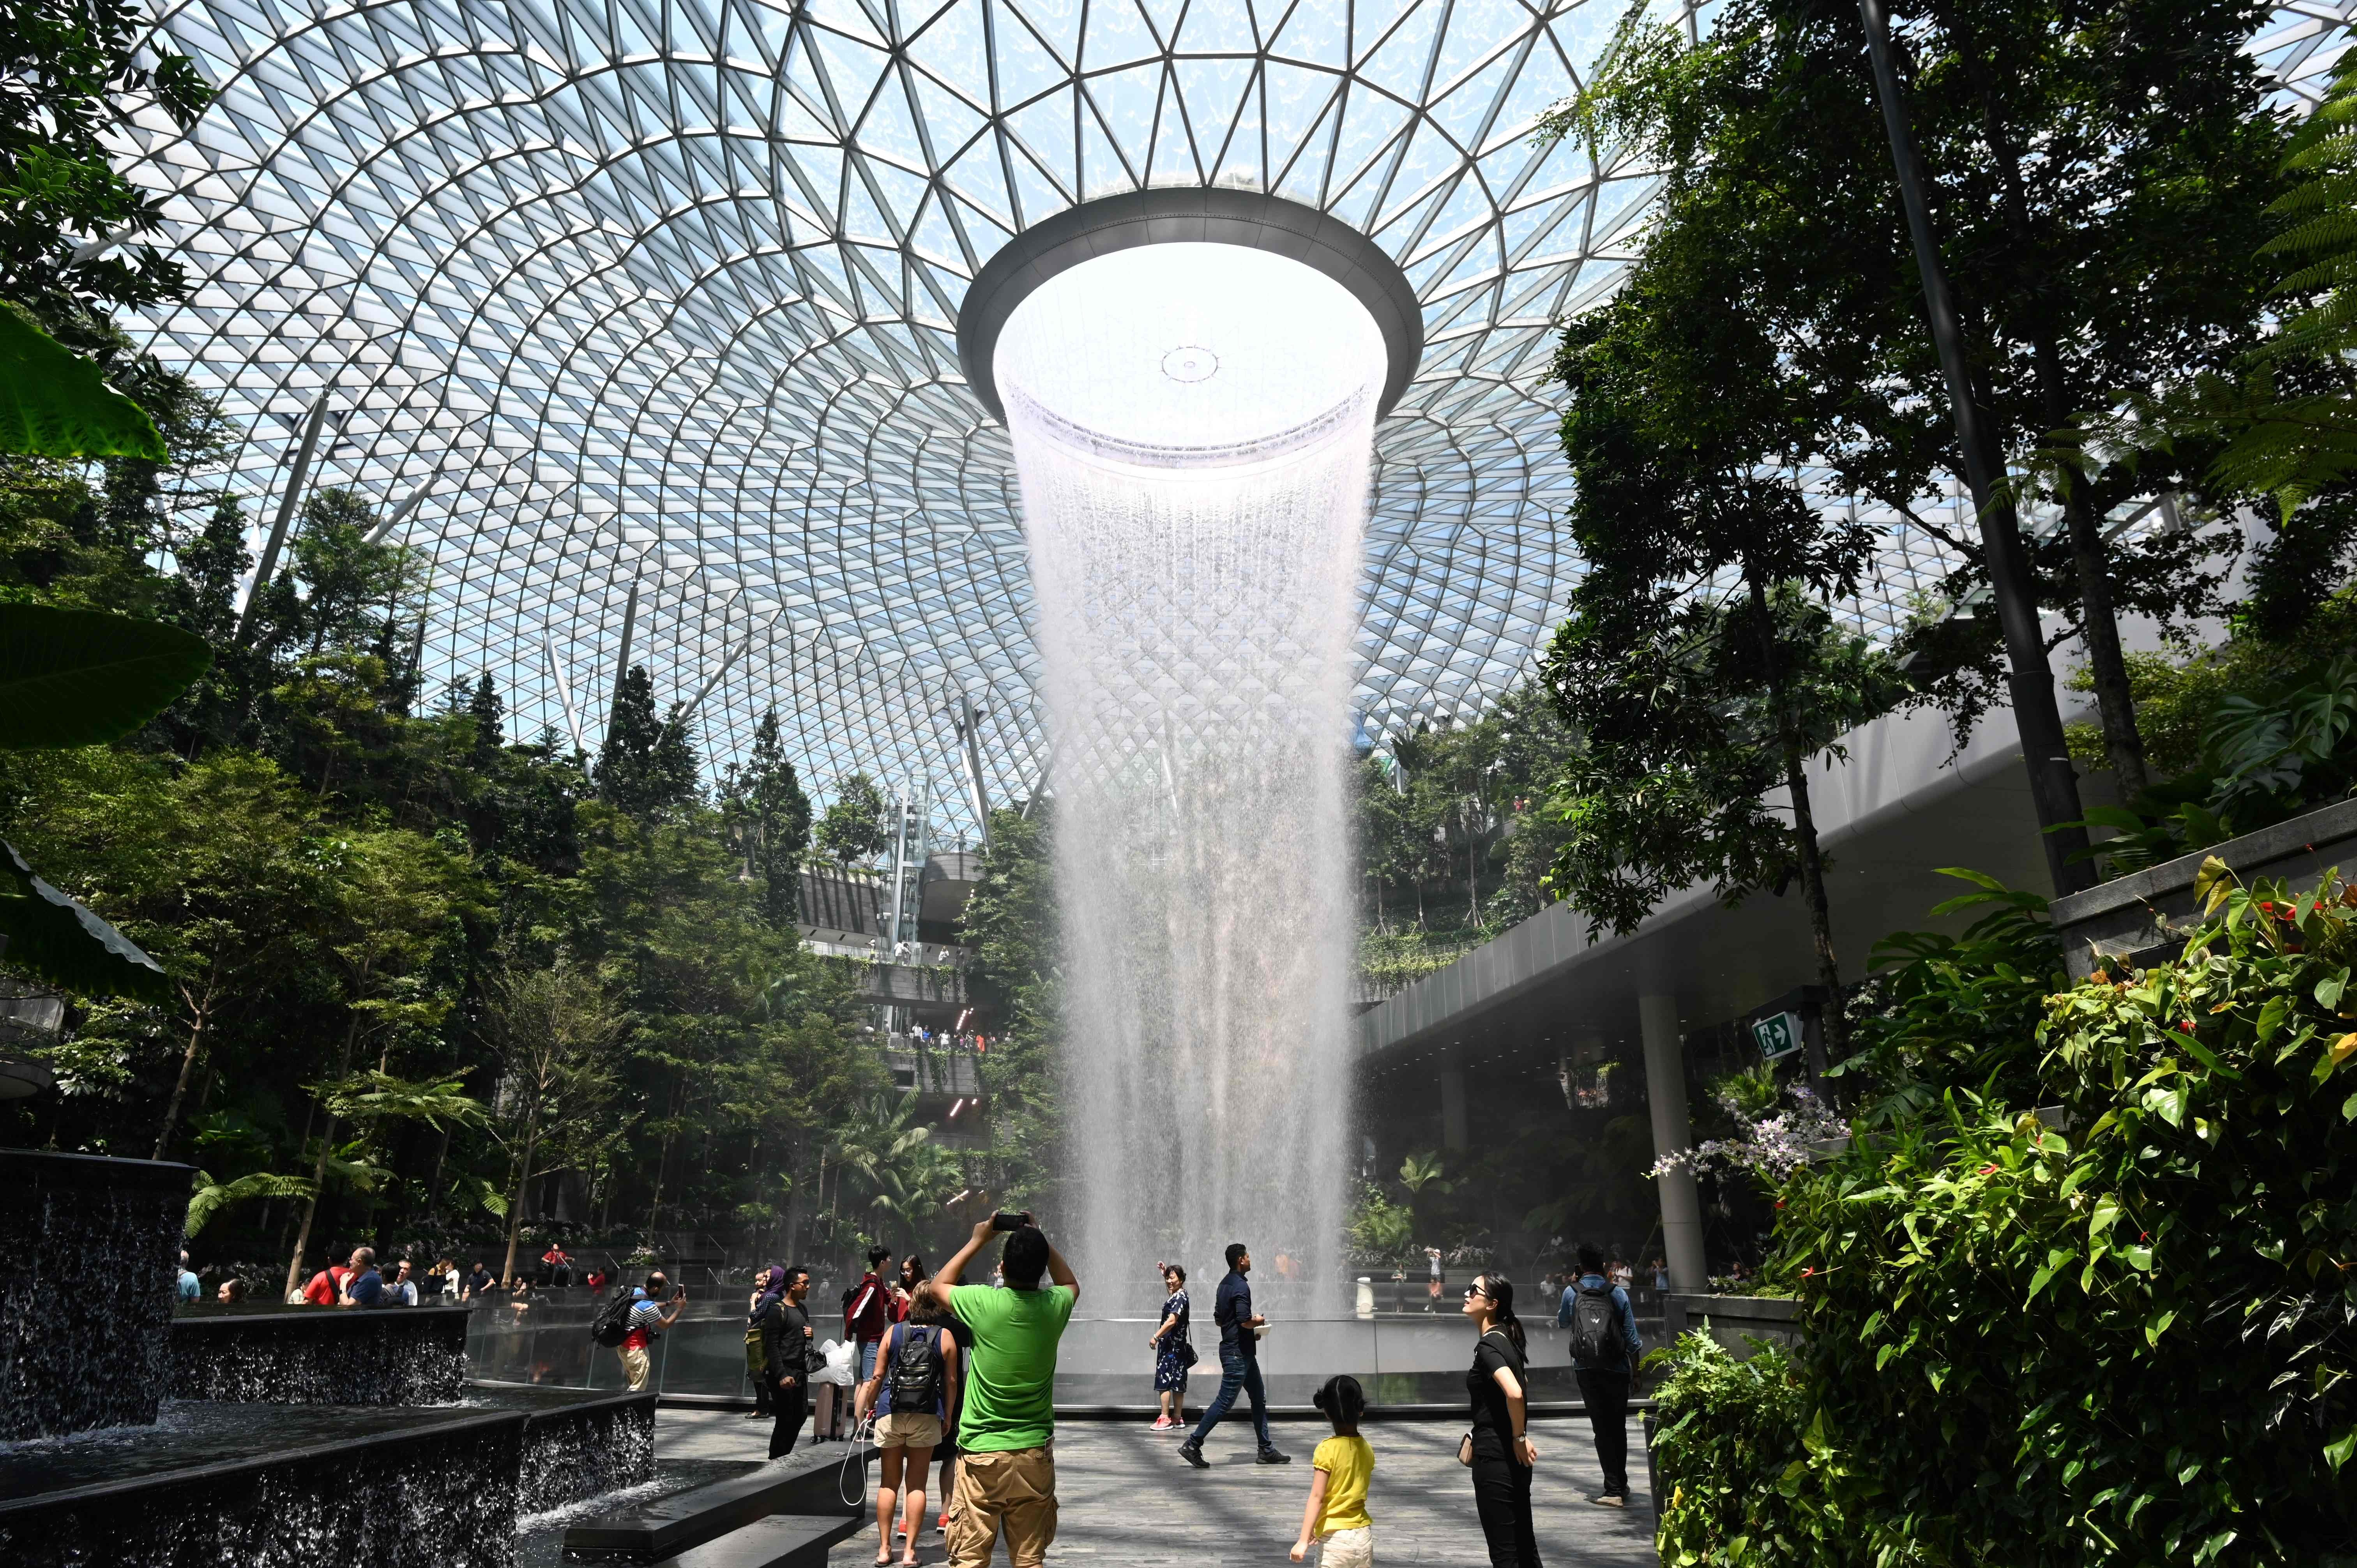 Visitors take photographs of the ‘Rain Vortex’ at Jewel Changi in Singapore on Wednesday. Photo: AFP